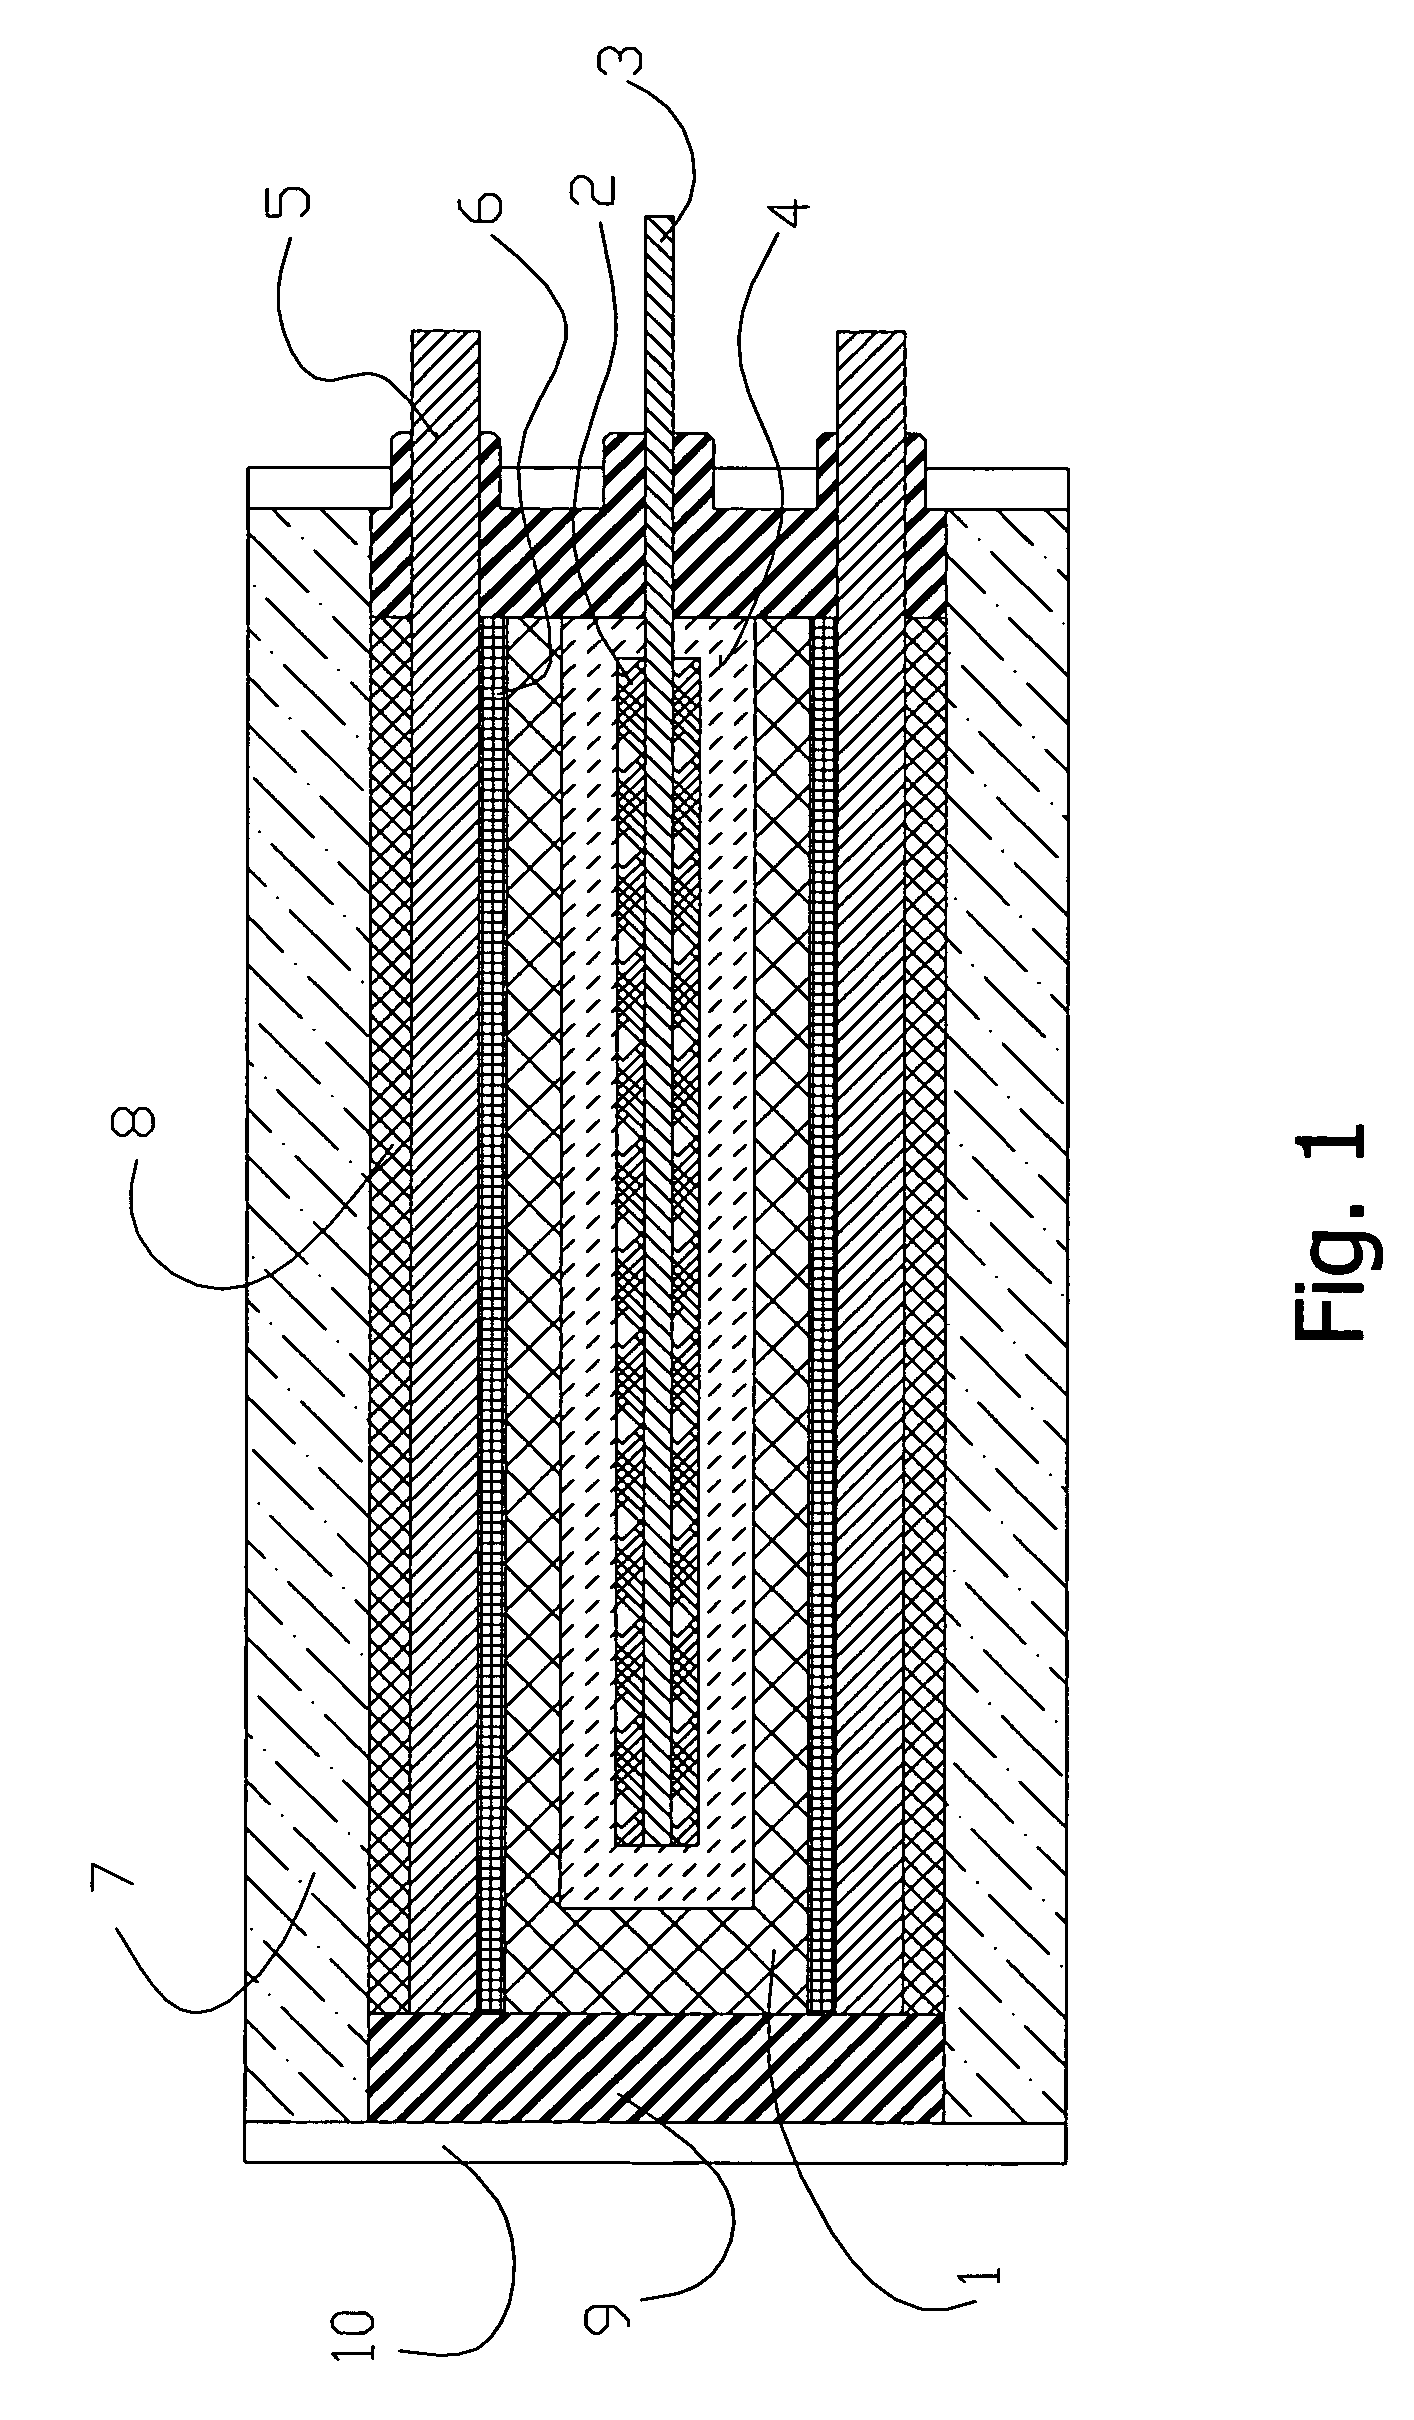 Positive electrode of an electric double layer capacitor